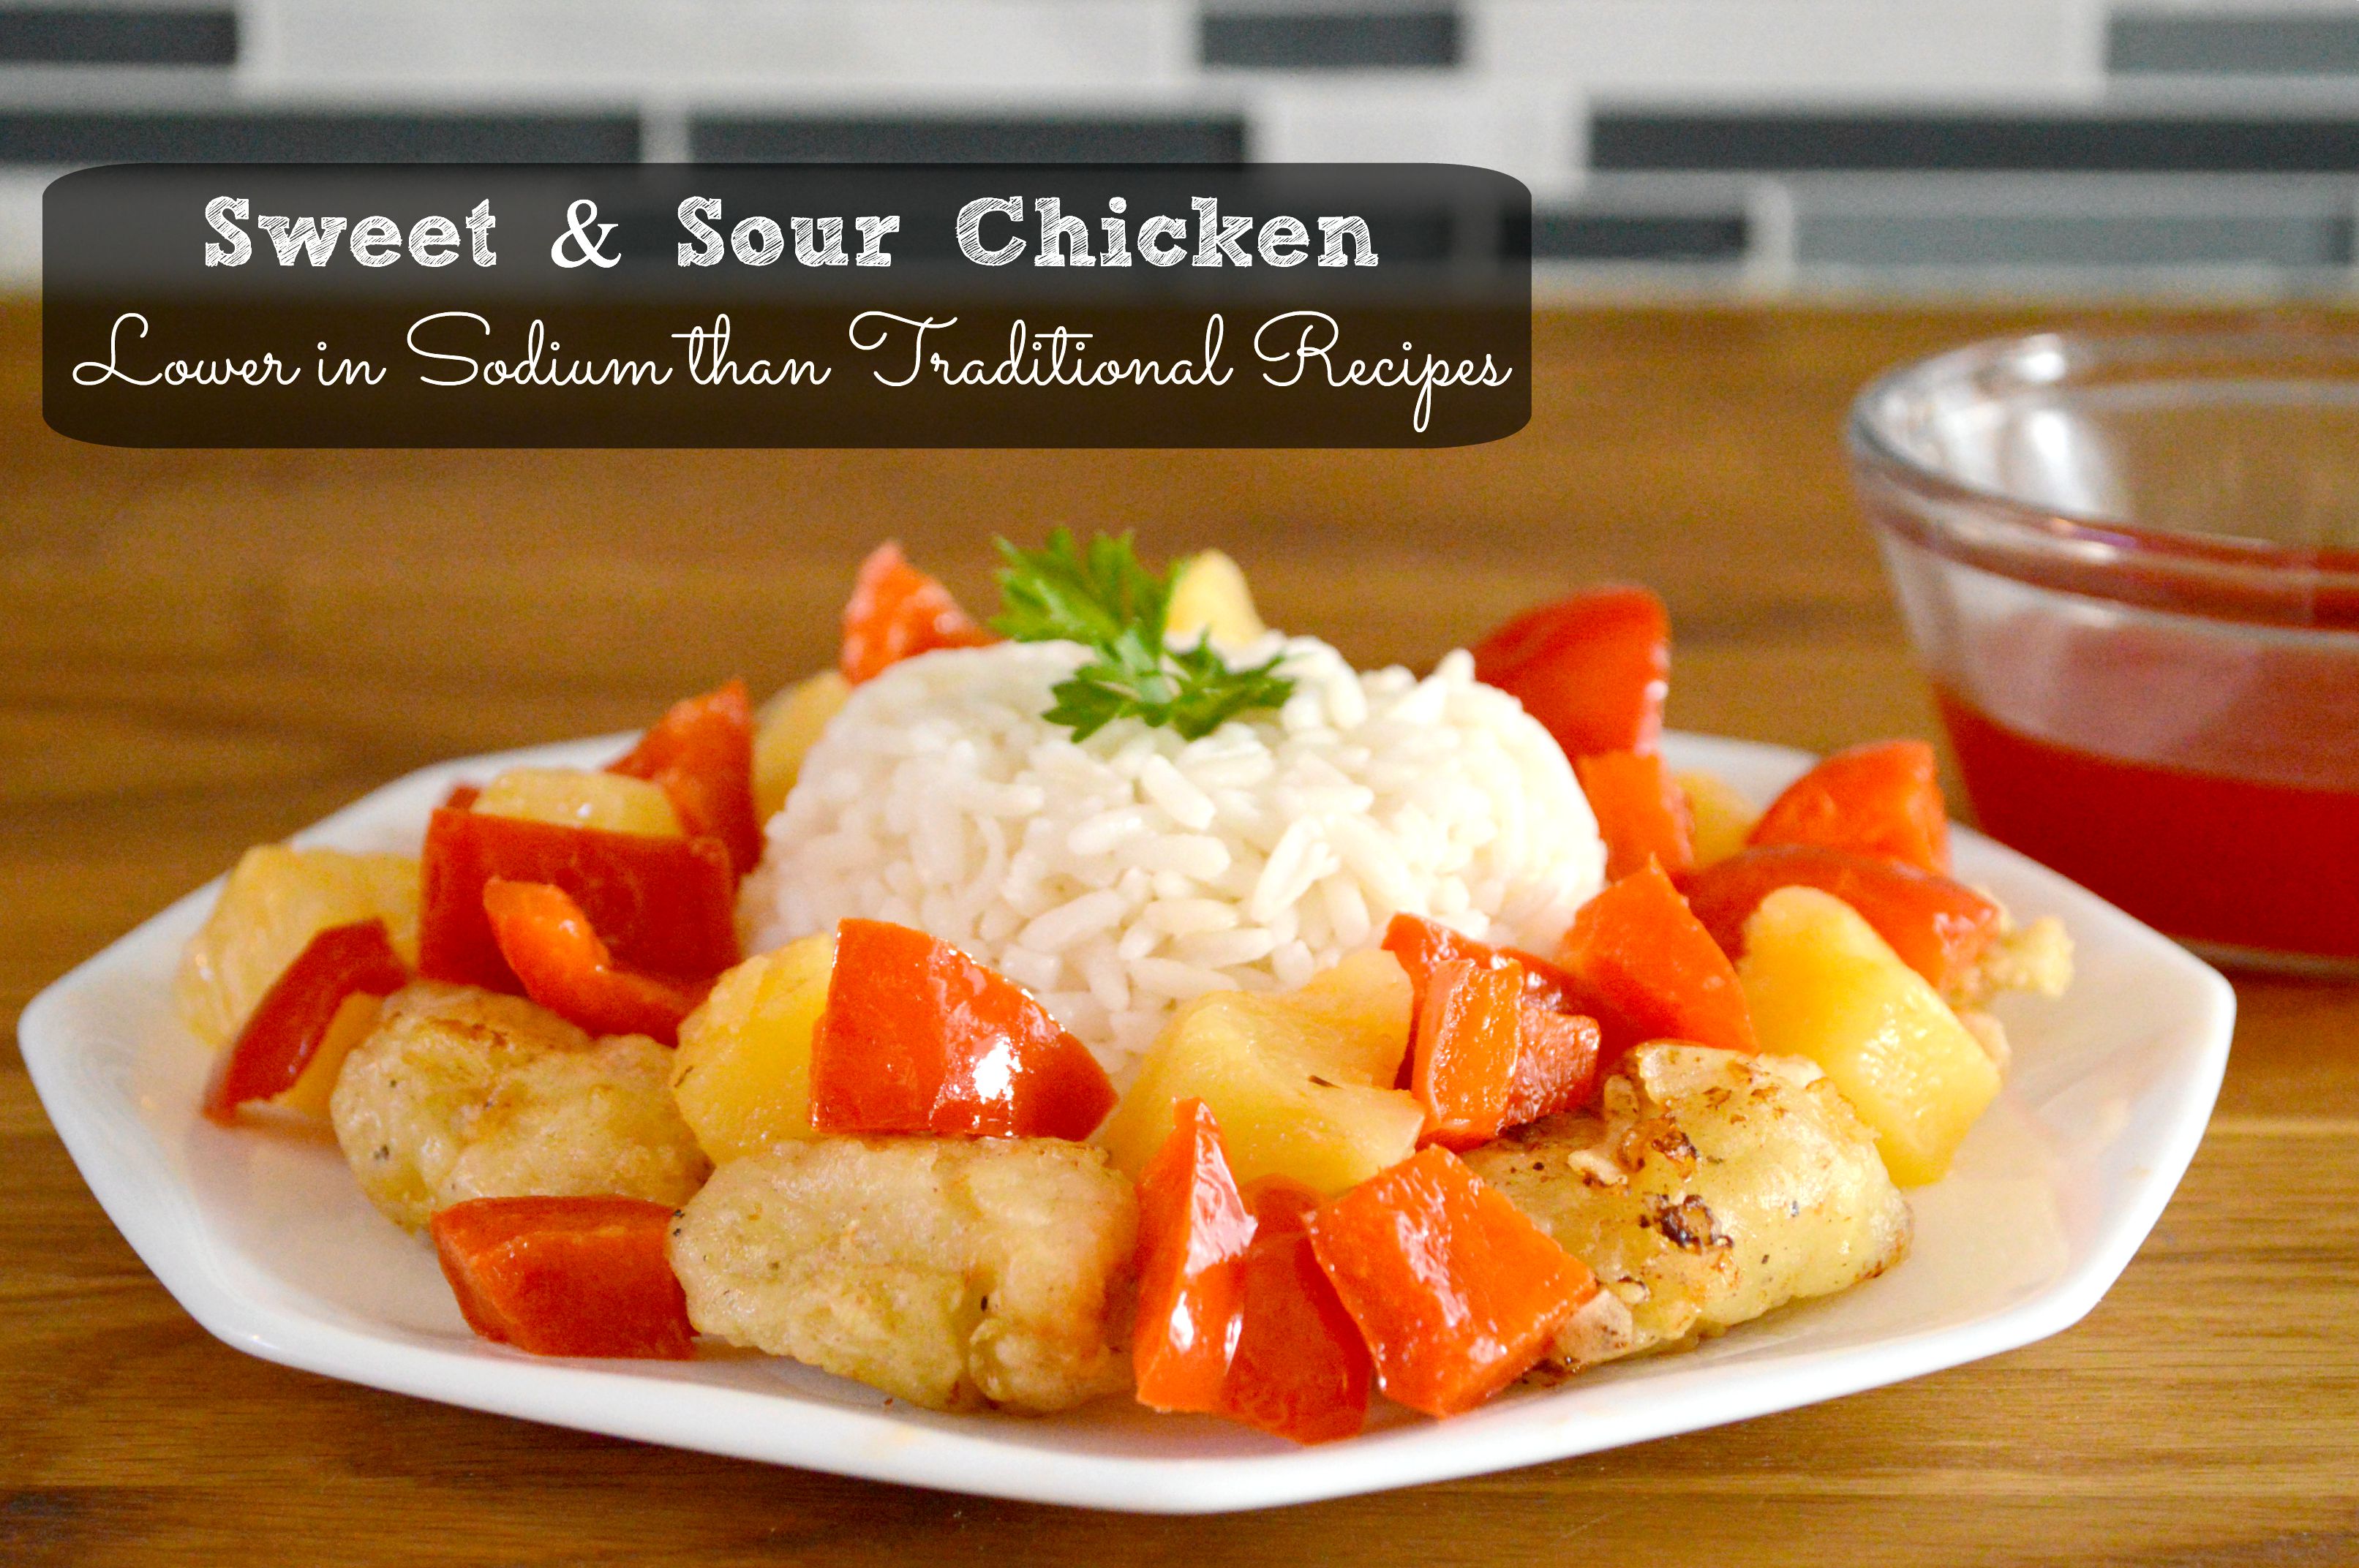 A lower sodium alternative to traditional Sweet & Sour Chicken recipes